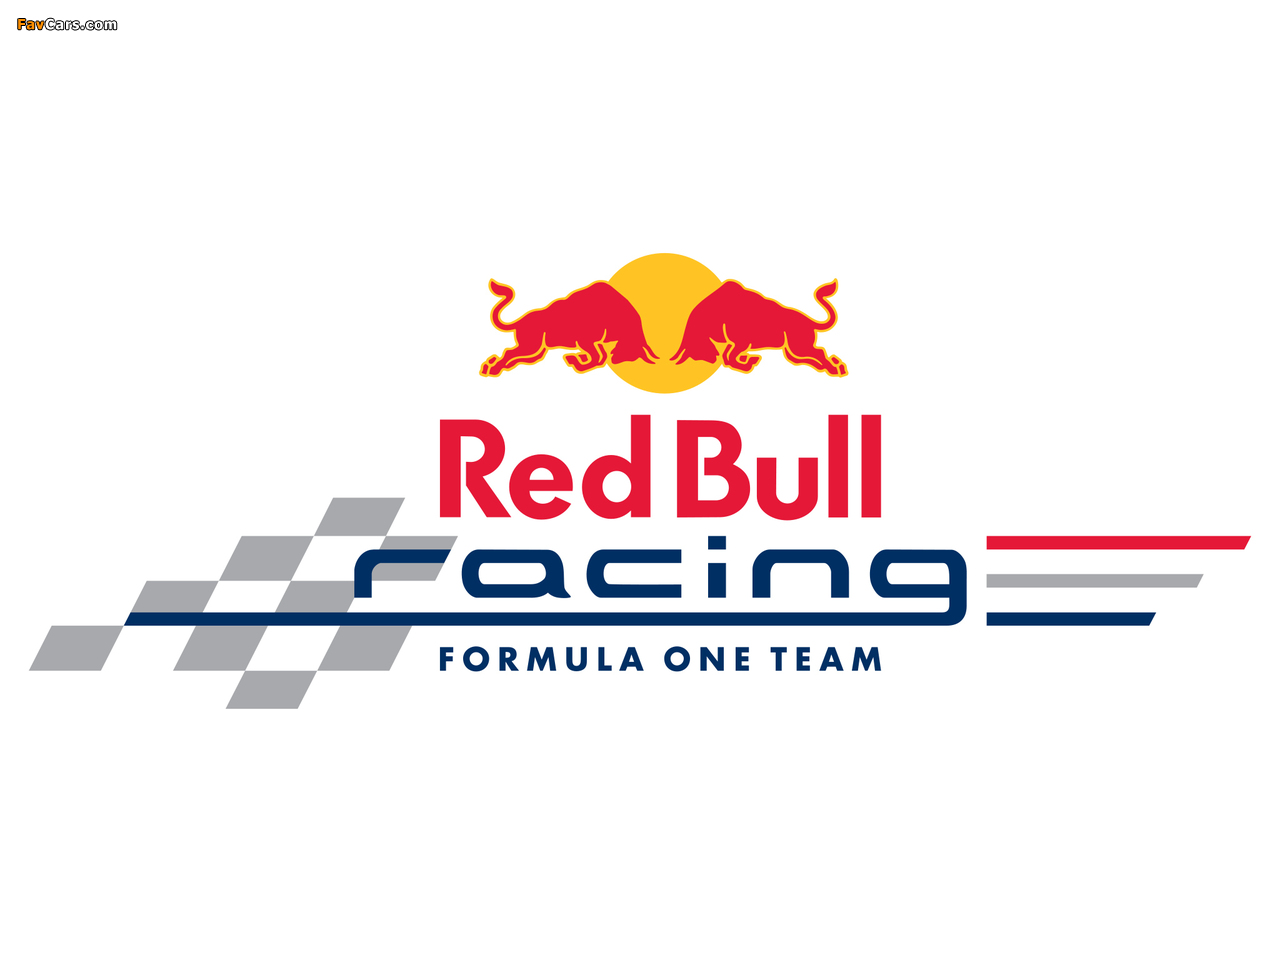 Red Bull images (1280 x 960)